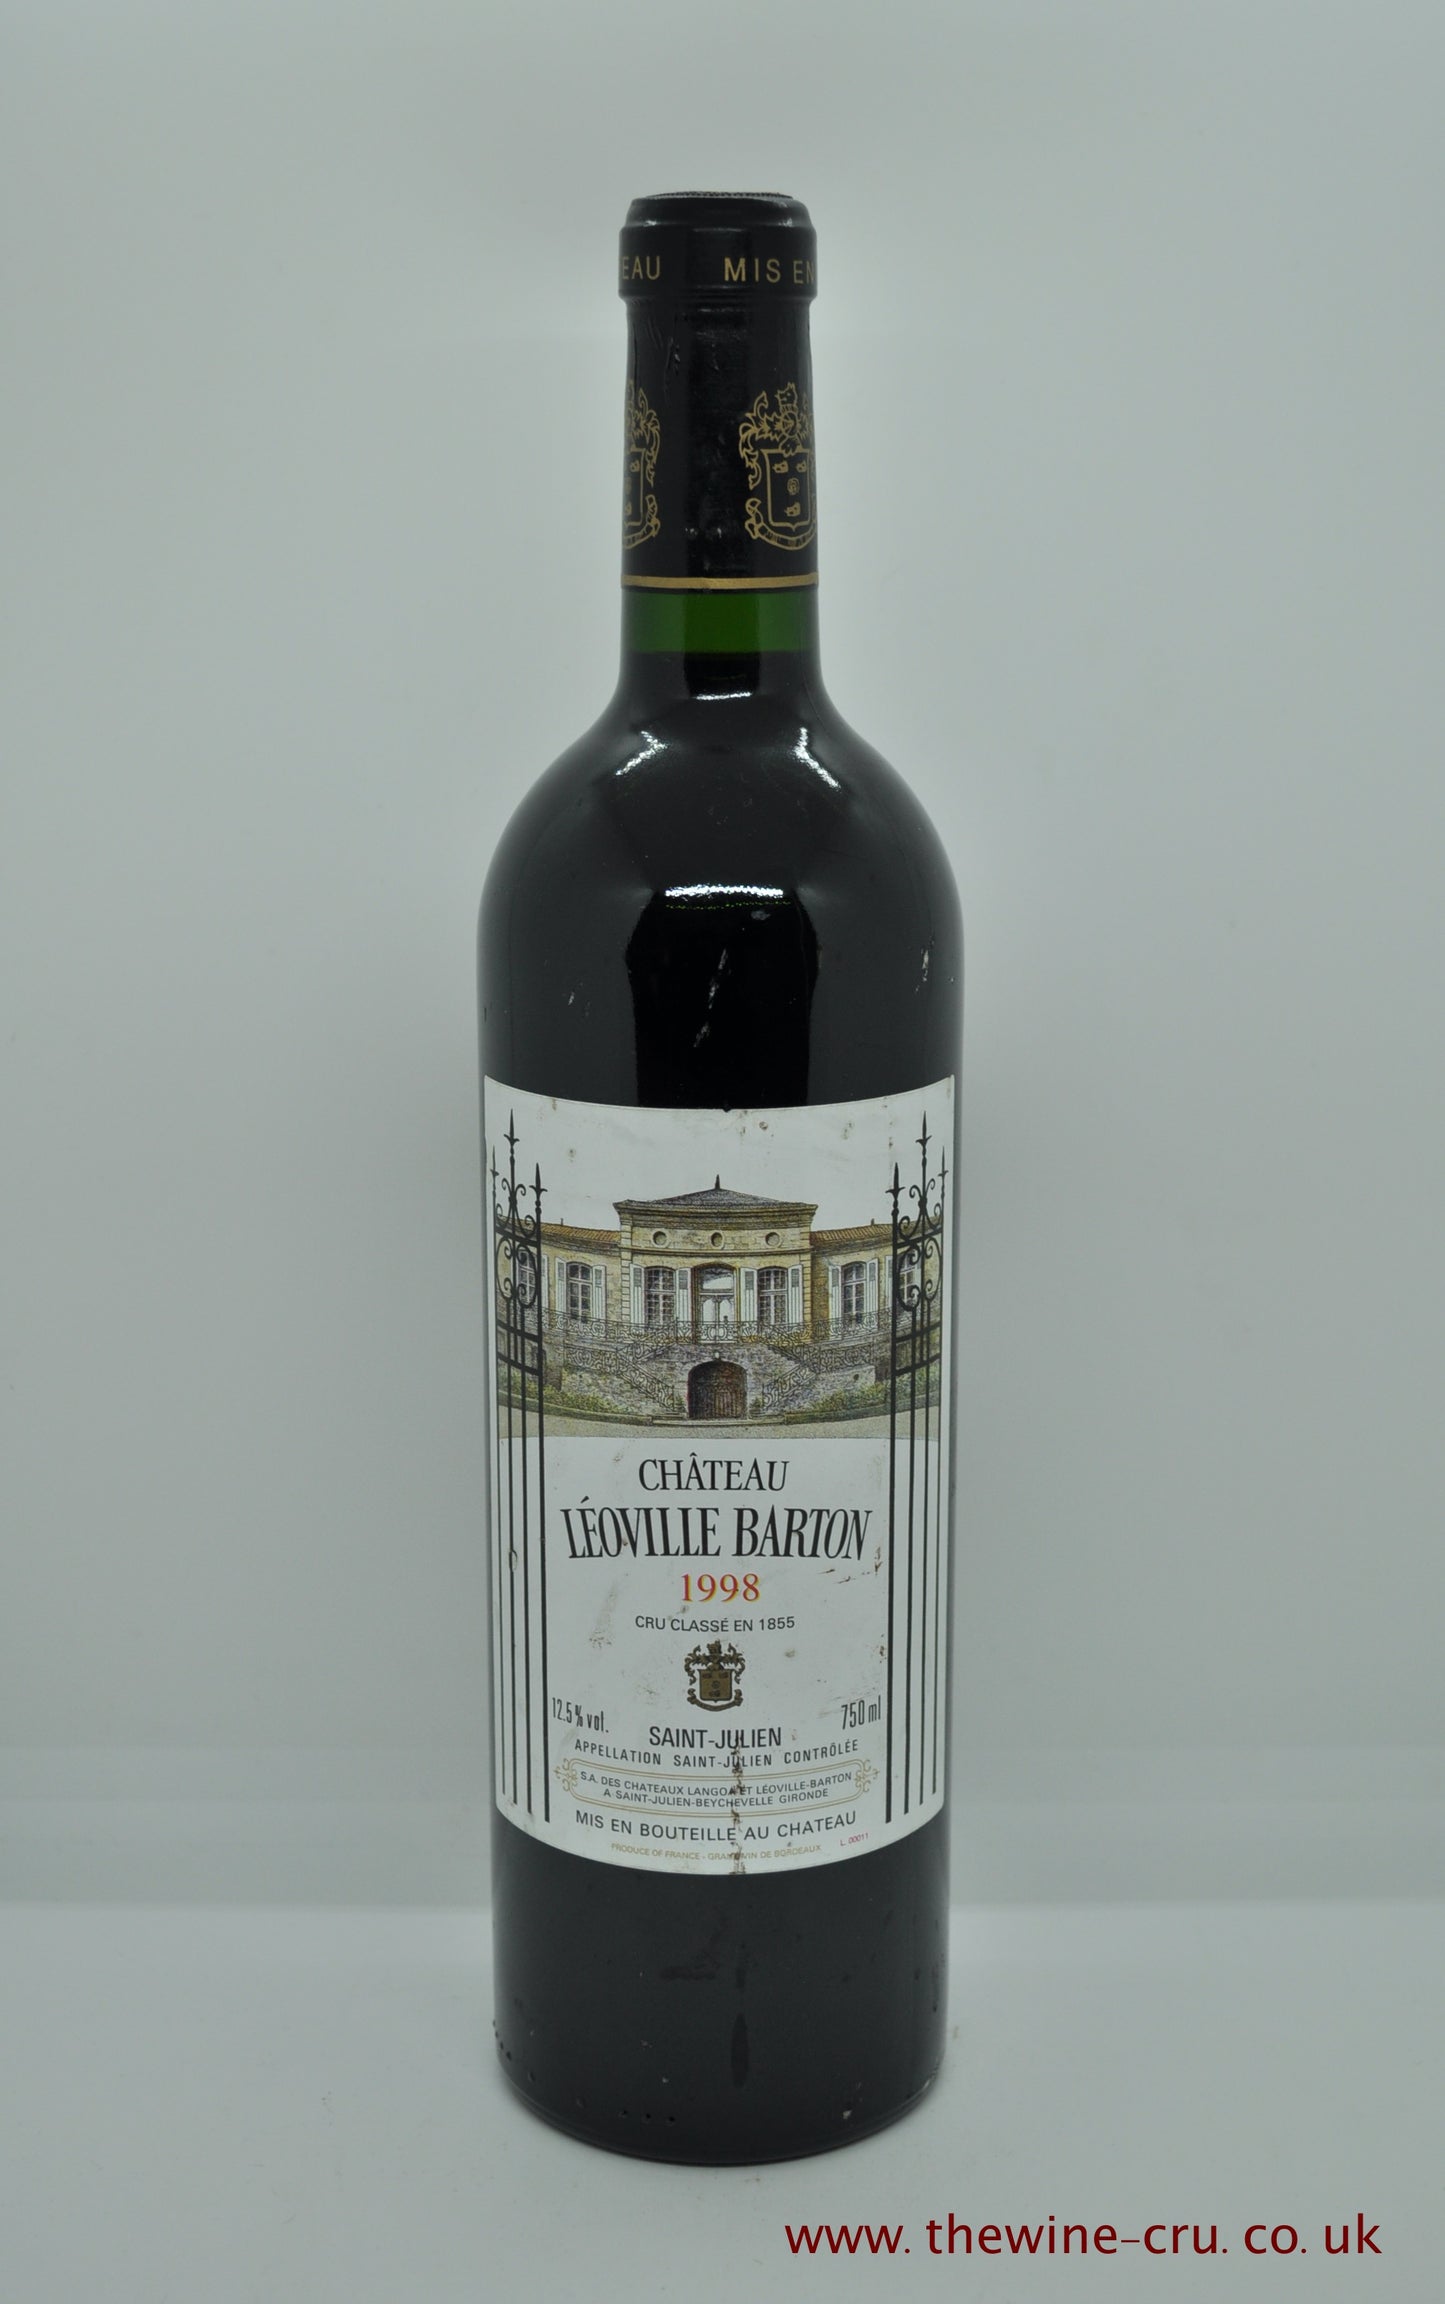 1998 vintage red wine. Chateau Leoville Barton 1998. France, Bordeaux. Immediate delivery. Free local delivery. Gift wrapping available.